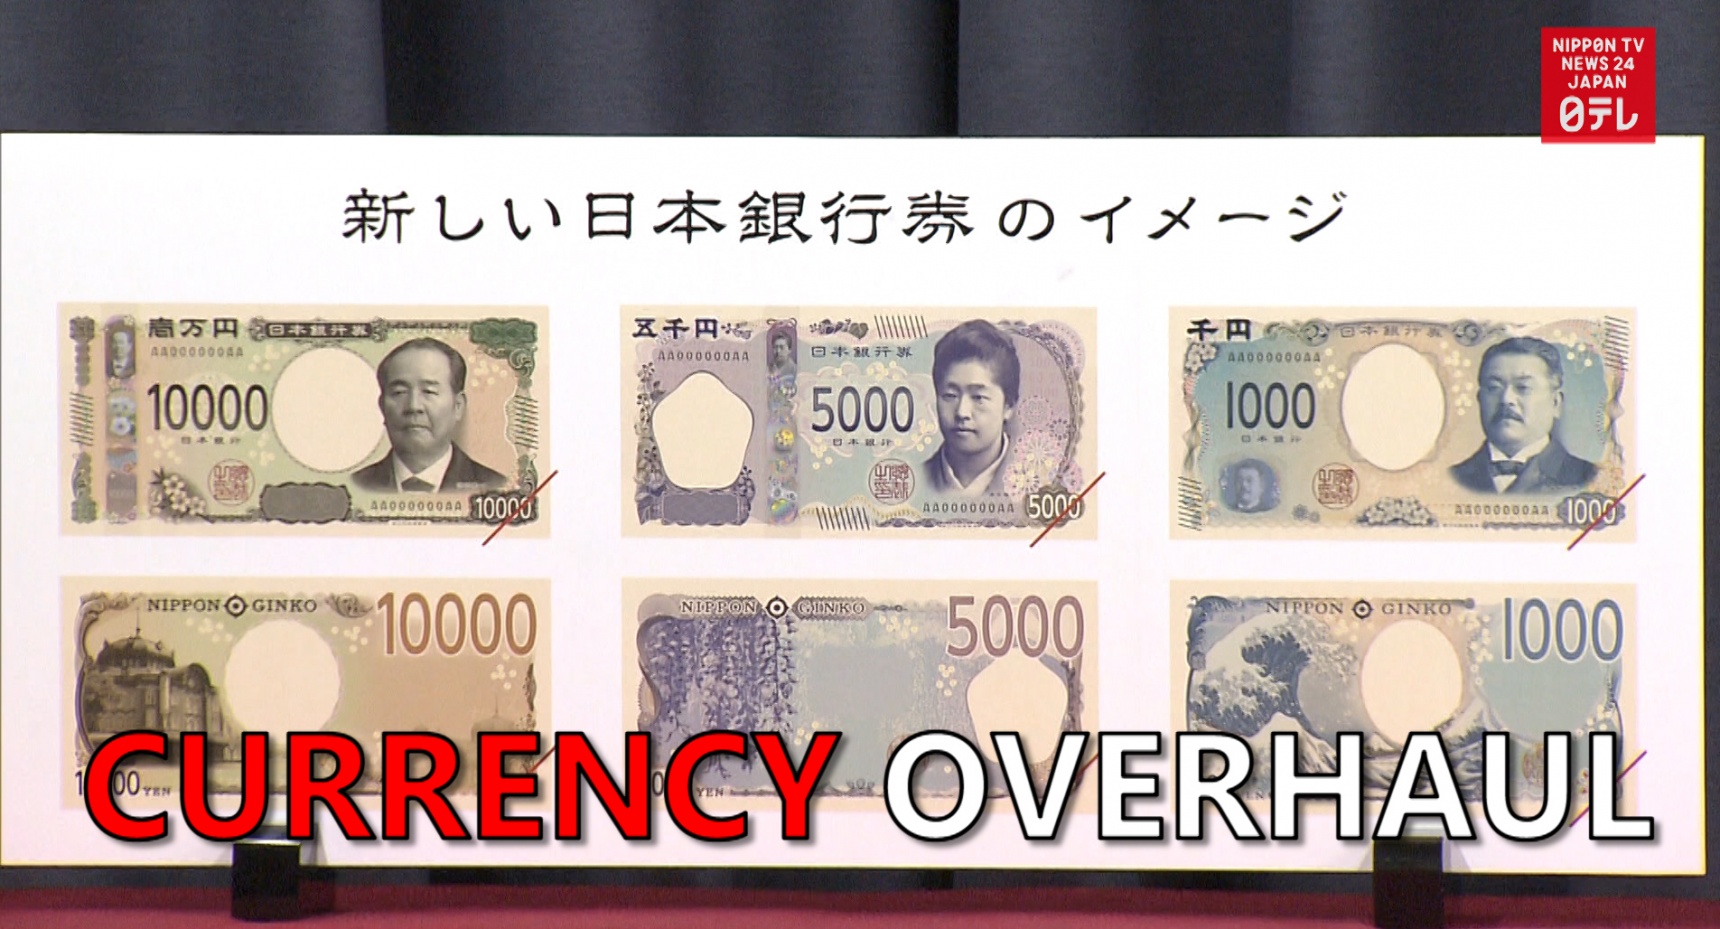 A Look Behind the Yen Makeover